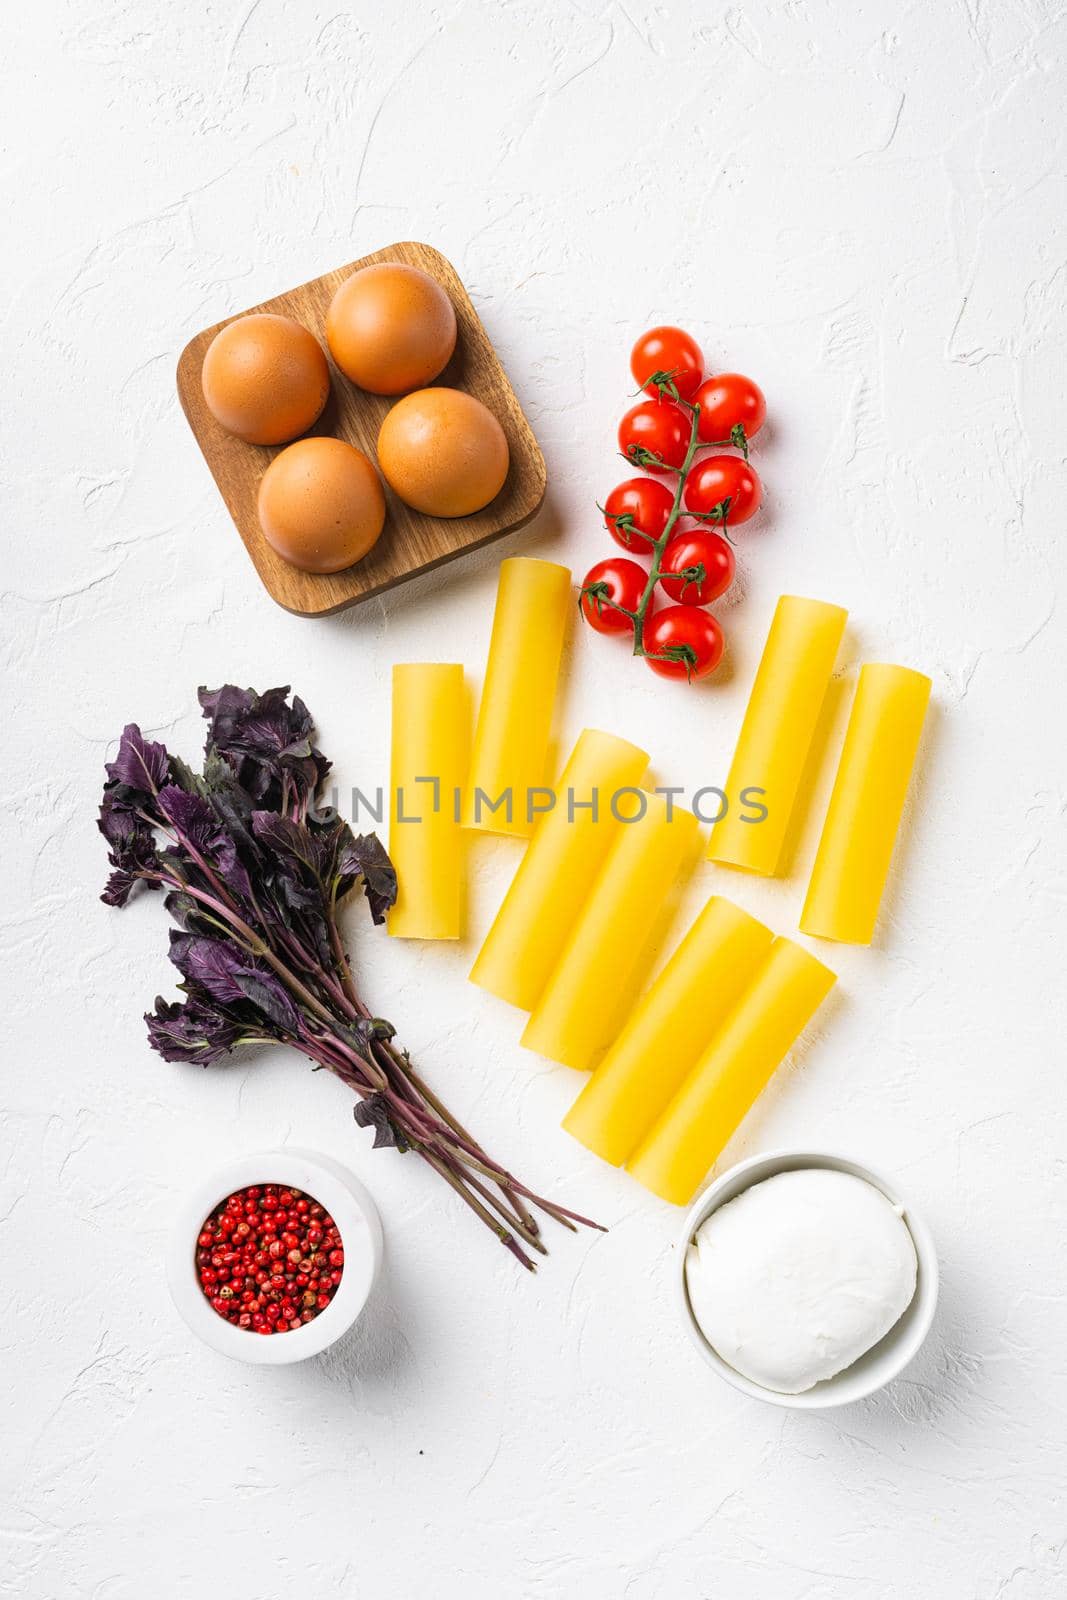 Cannelloni with ingredients, on white stone table background, top view flat lay by Ilianesolenyi